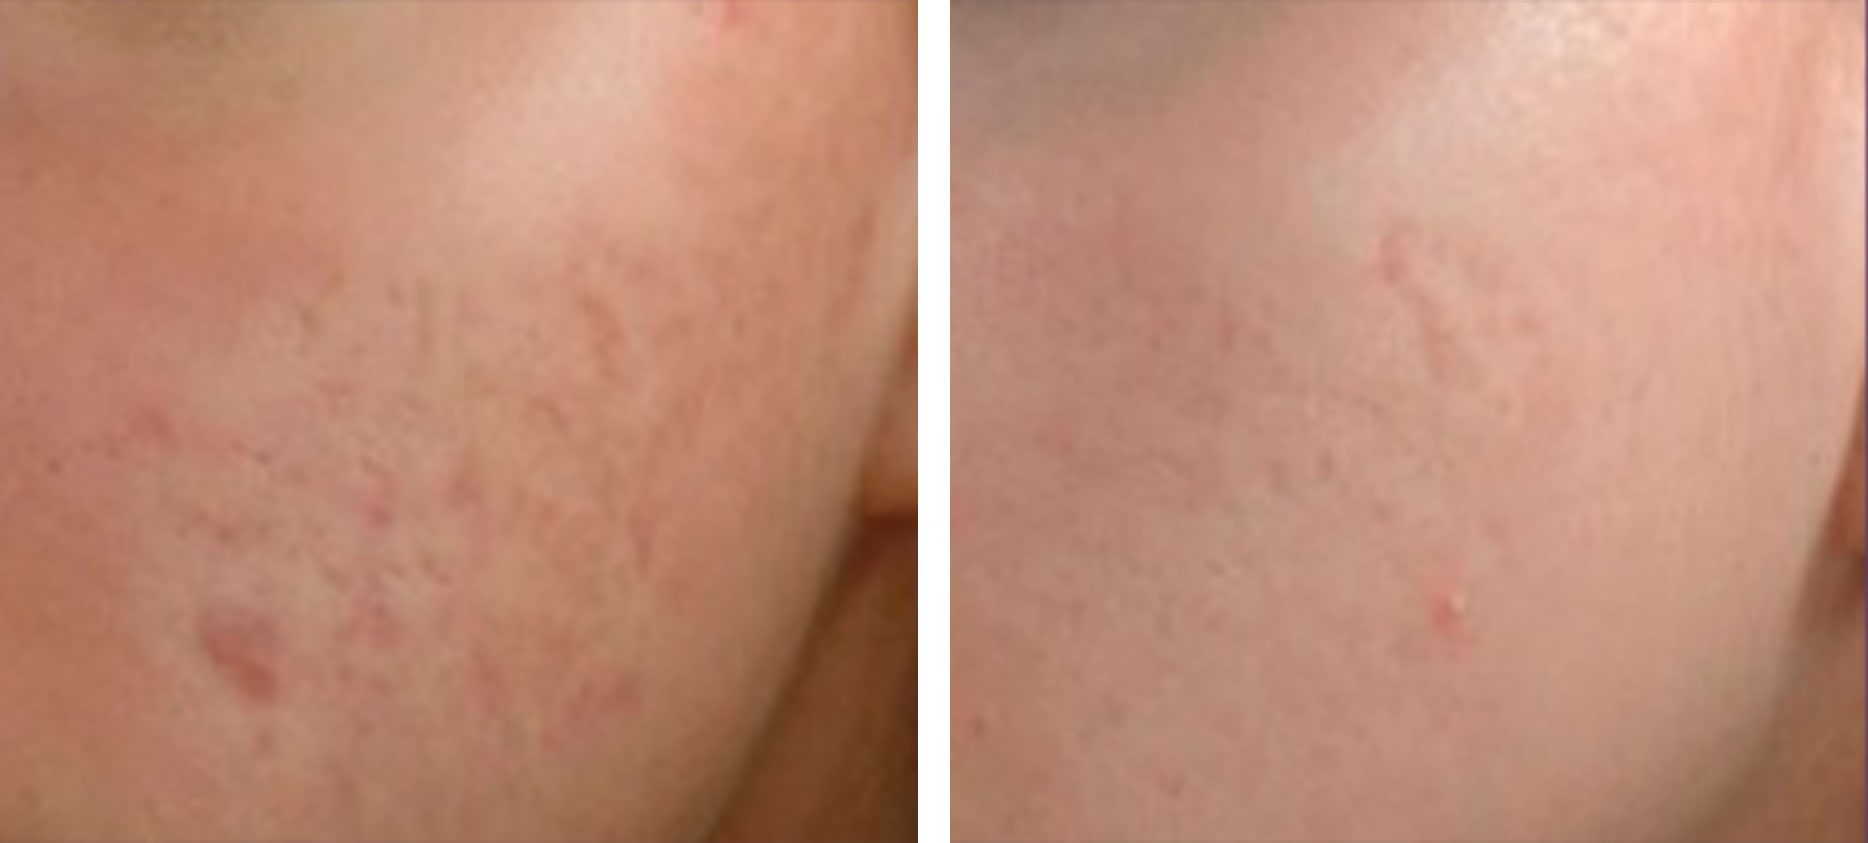 Acne & acne scars treatment before and after at Kingsway Dermatology